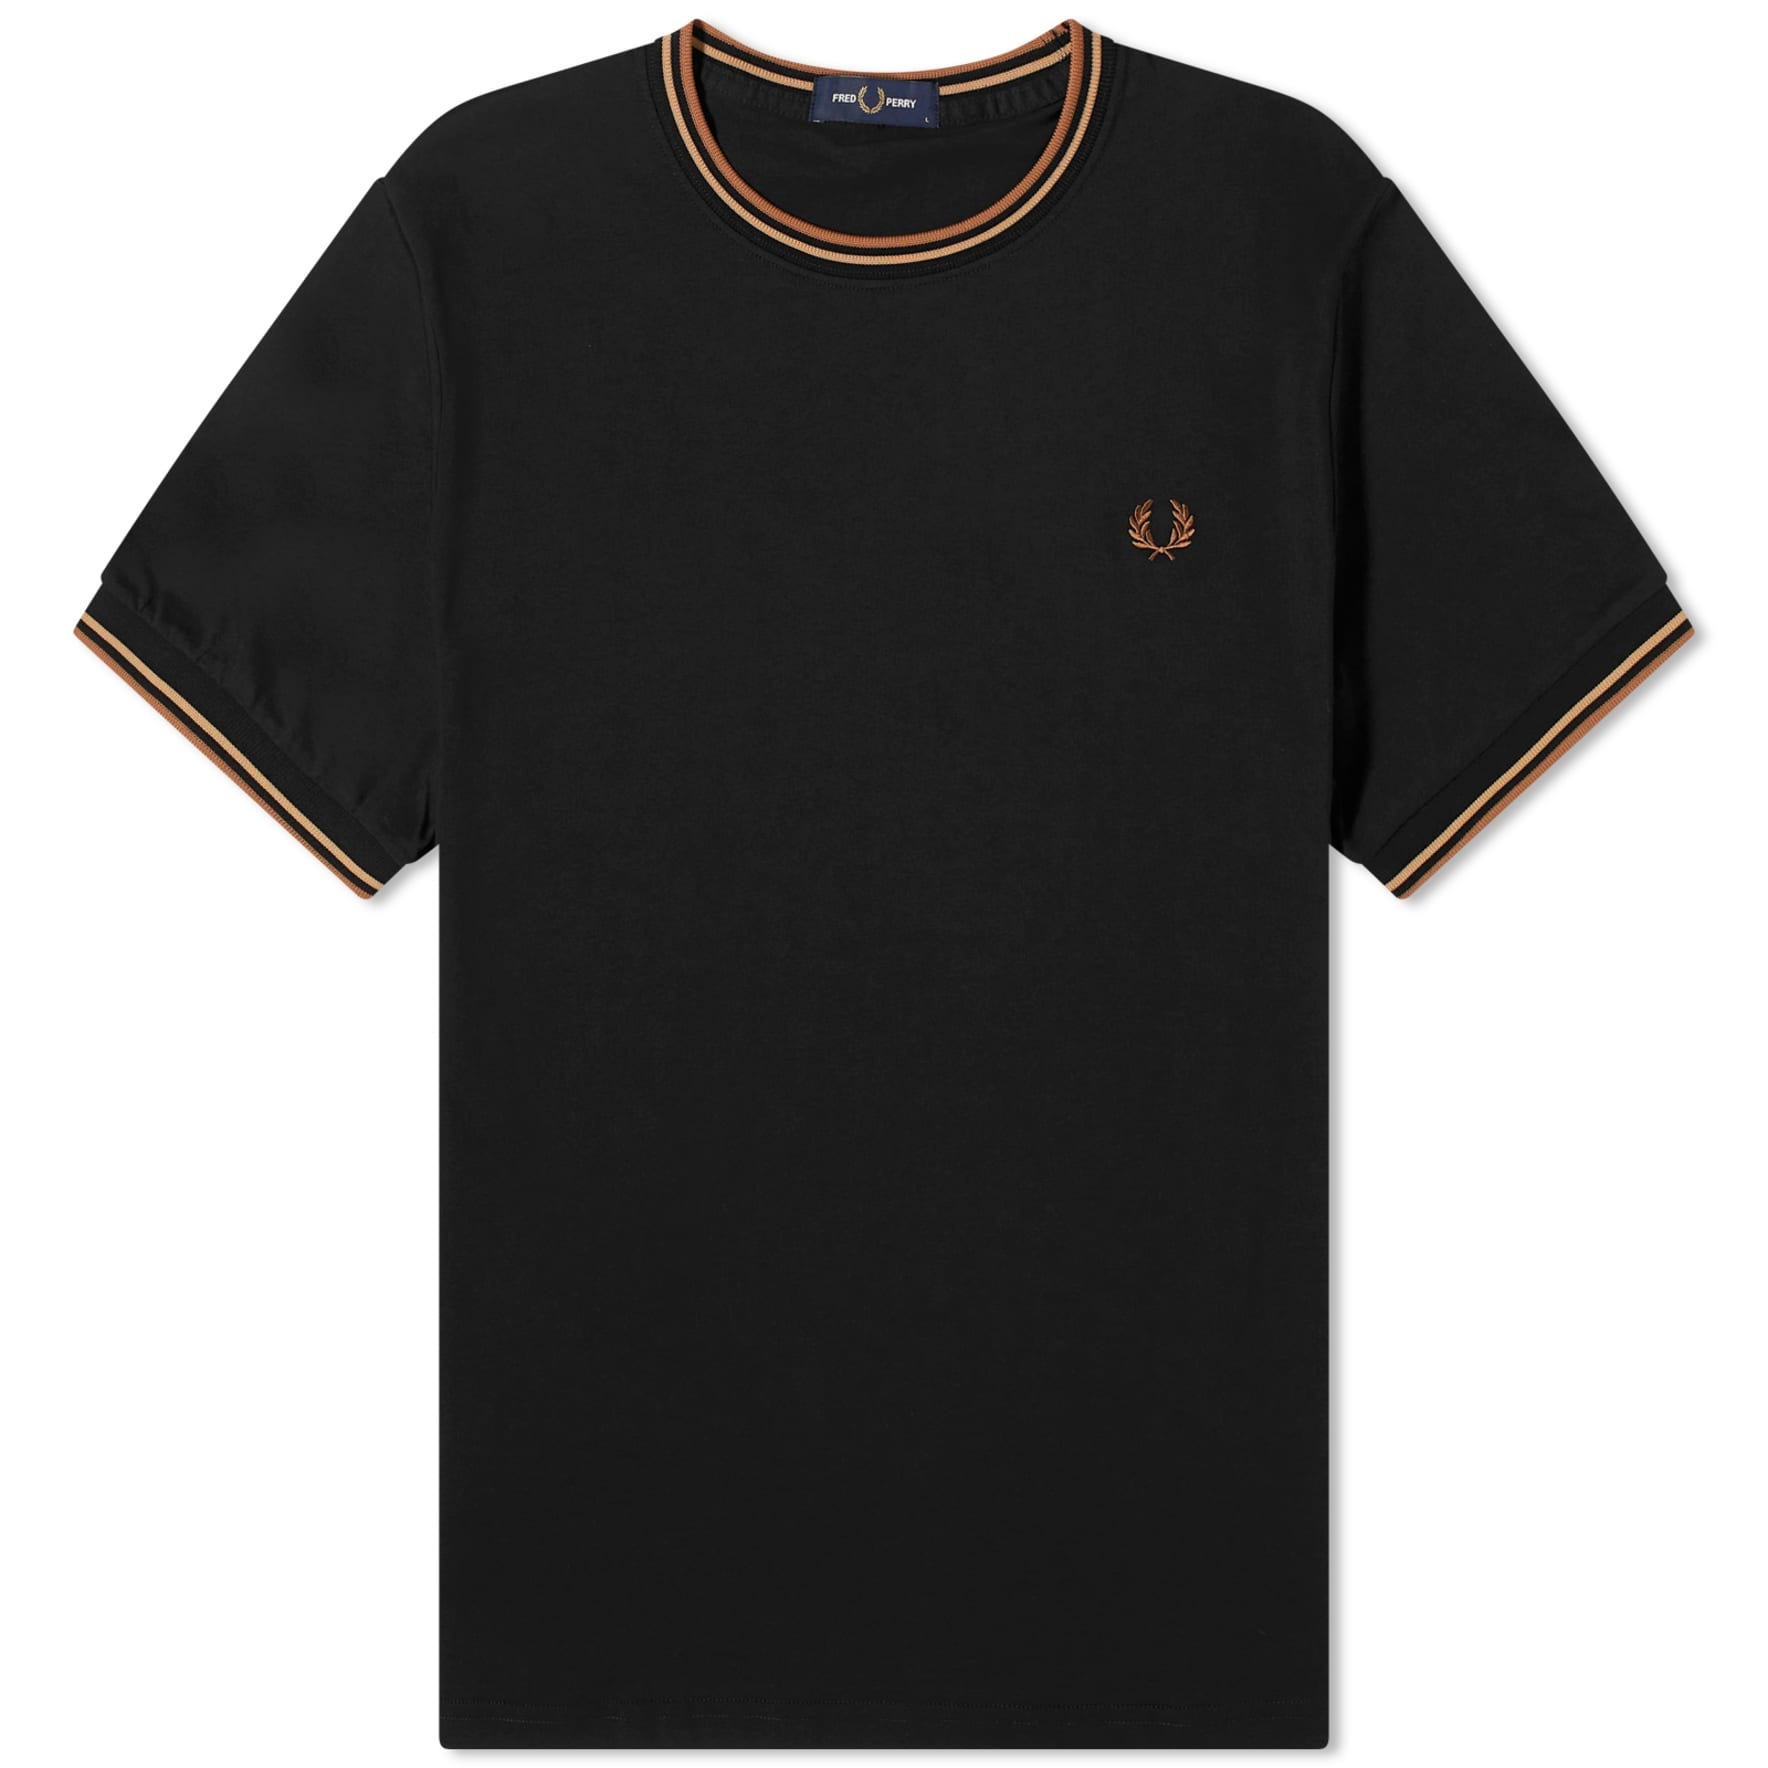 Футболка Fred Perry Twin Tipped, черный поло fred perry twin tipped цвет grey stone